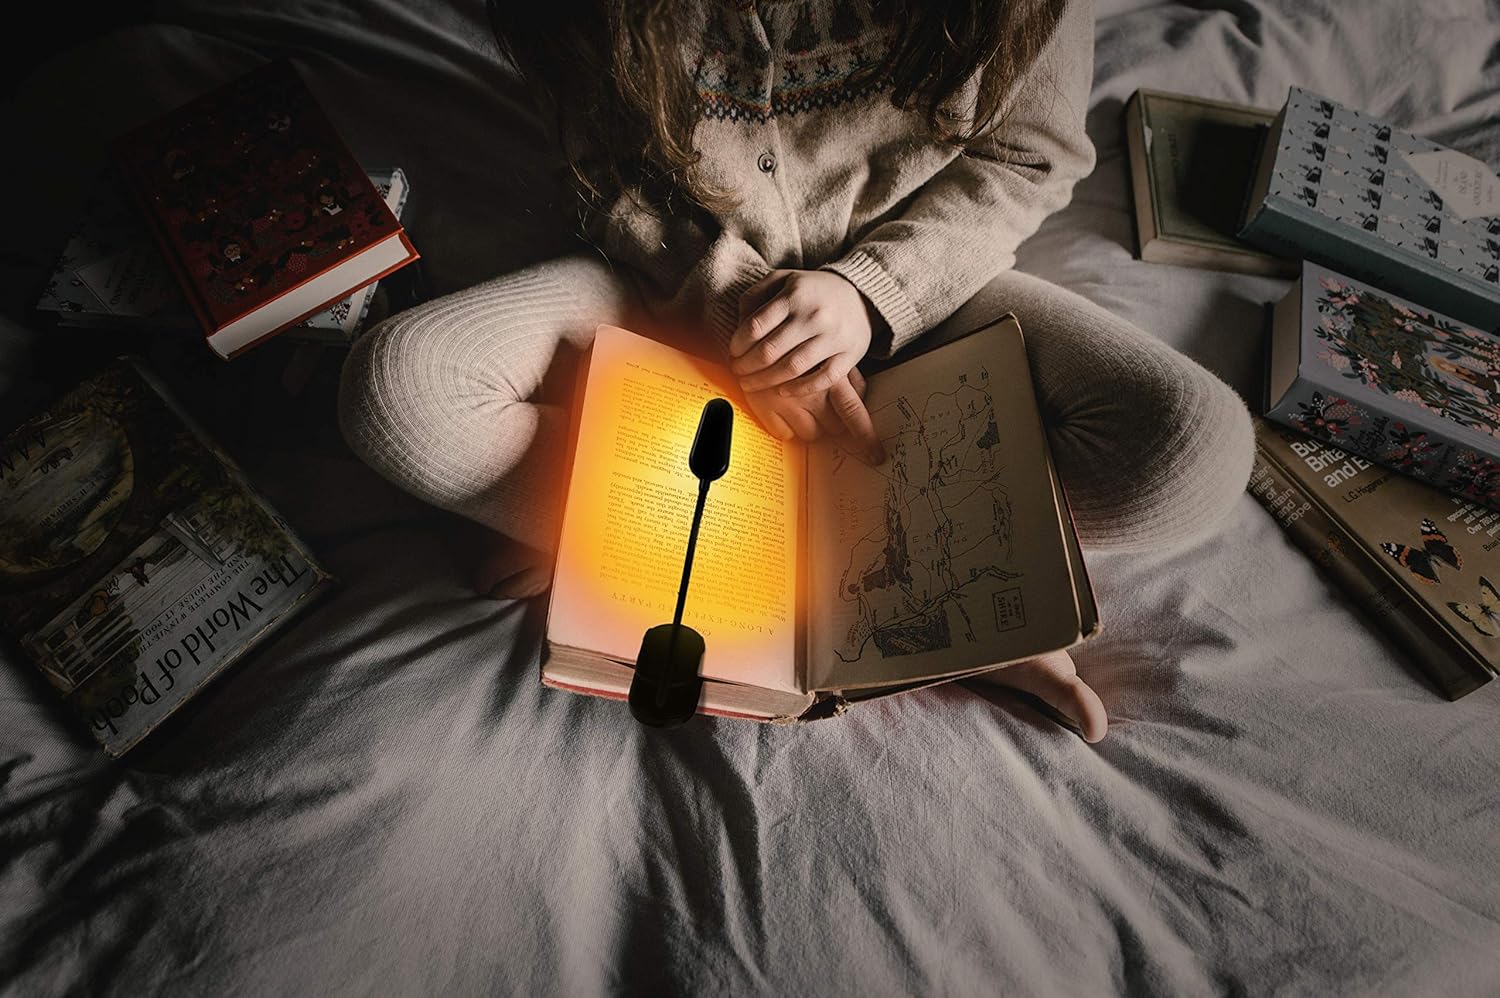 Amber LED Book Light: Healthy Reading Companion